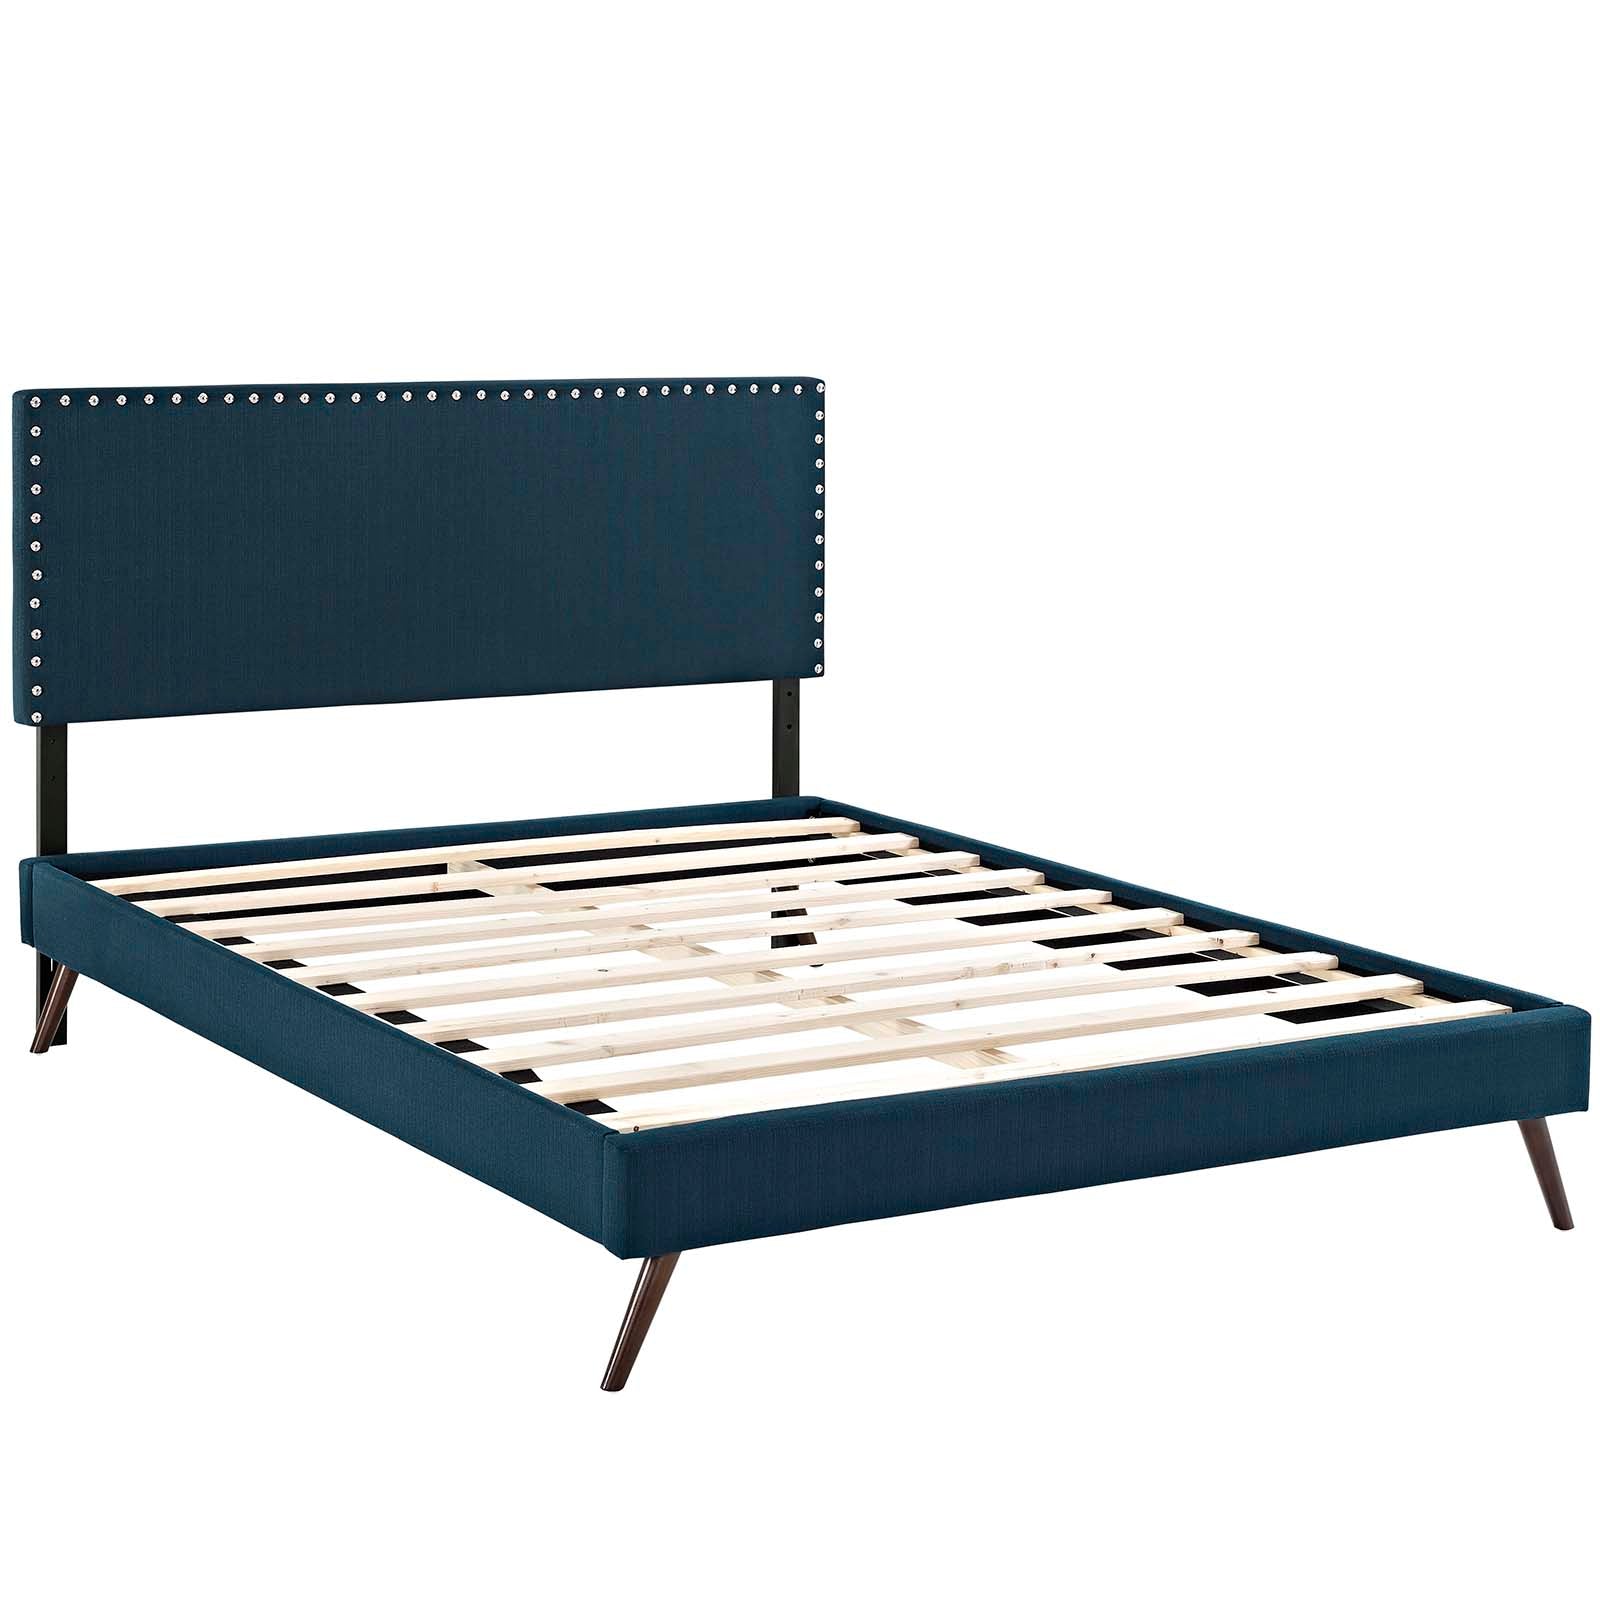 Macie Queen Fabric Platform Bed with Round Splayed Legs - East Shore Modern Home Furnishings